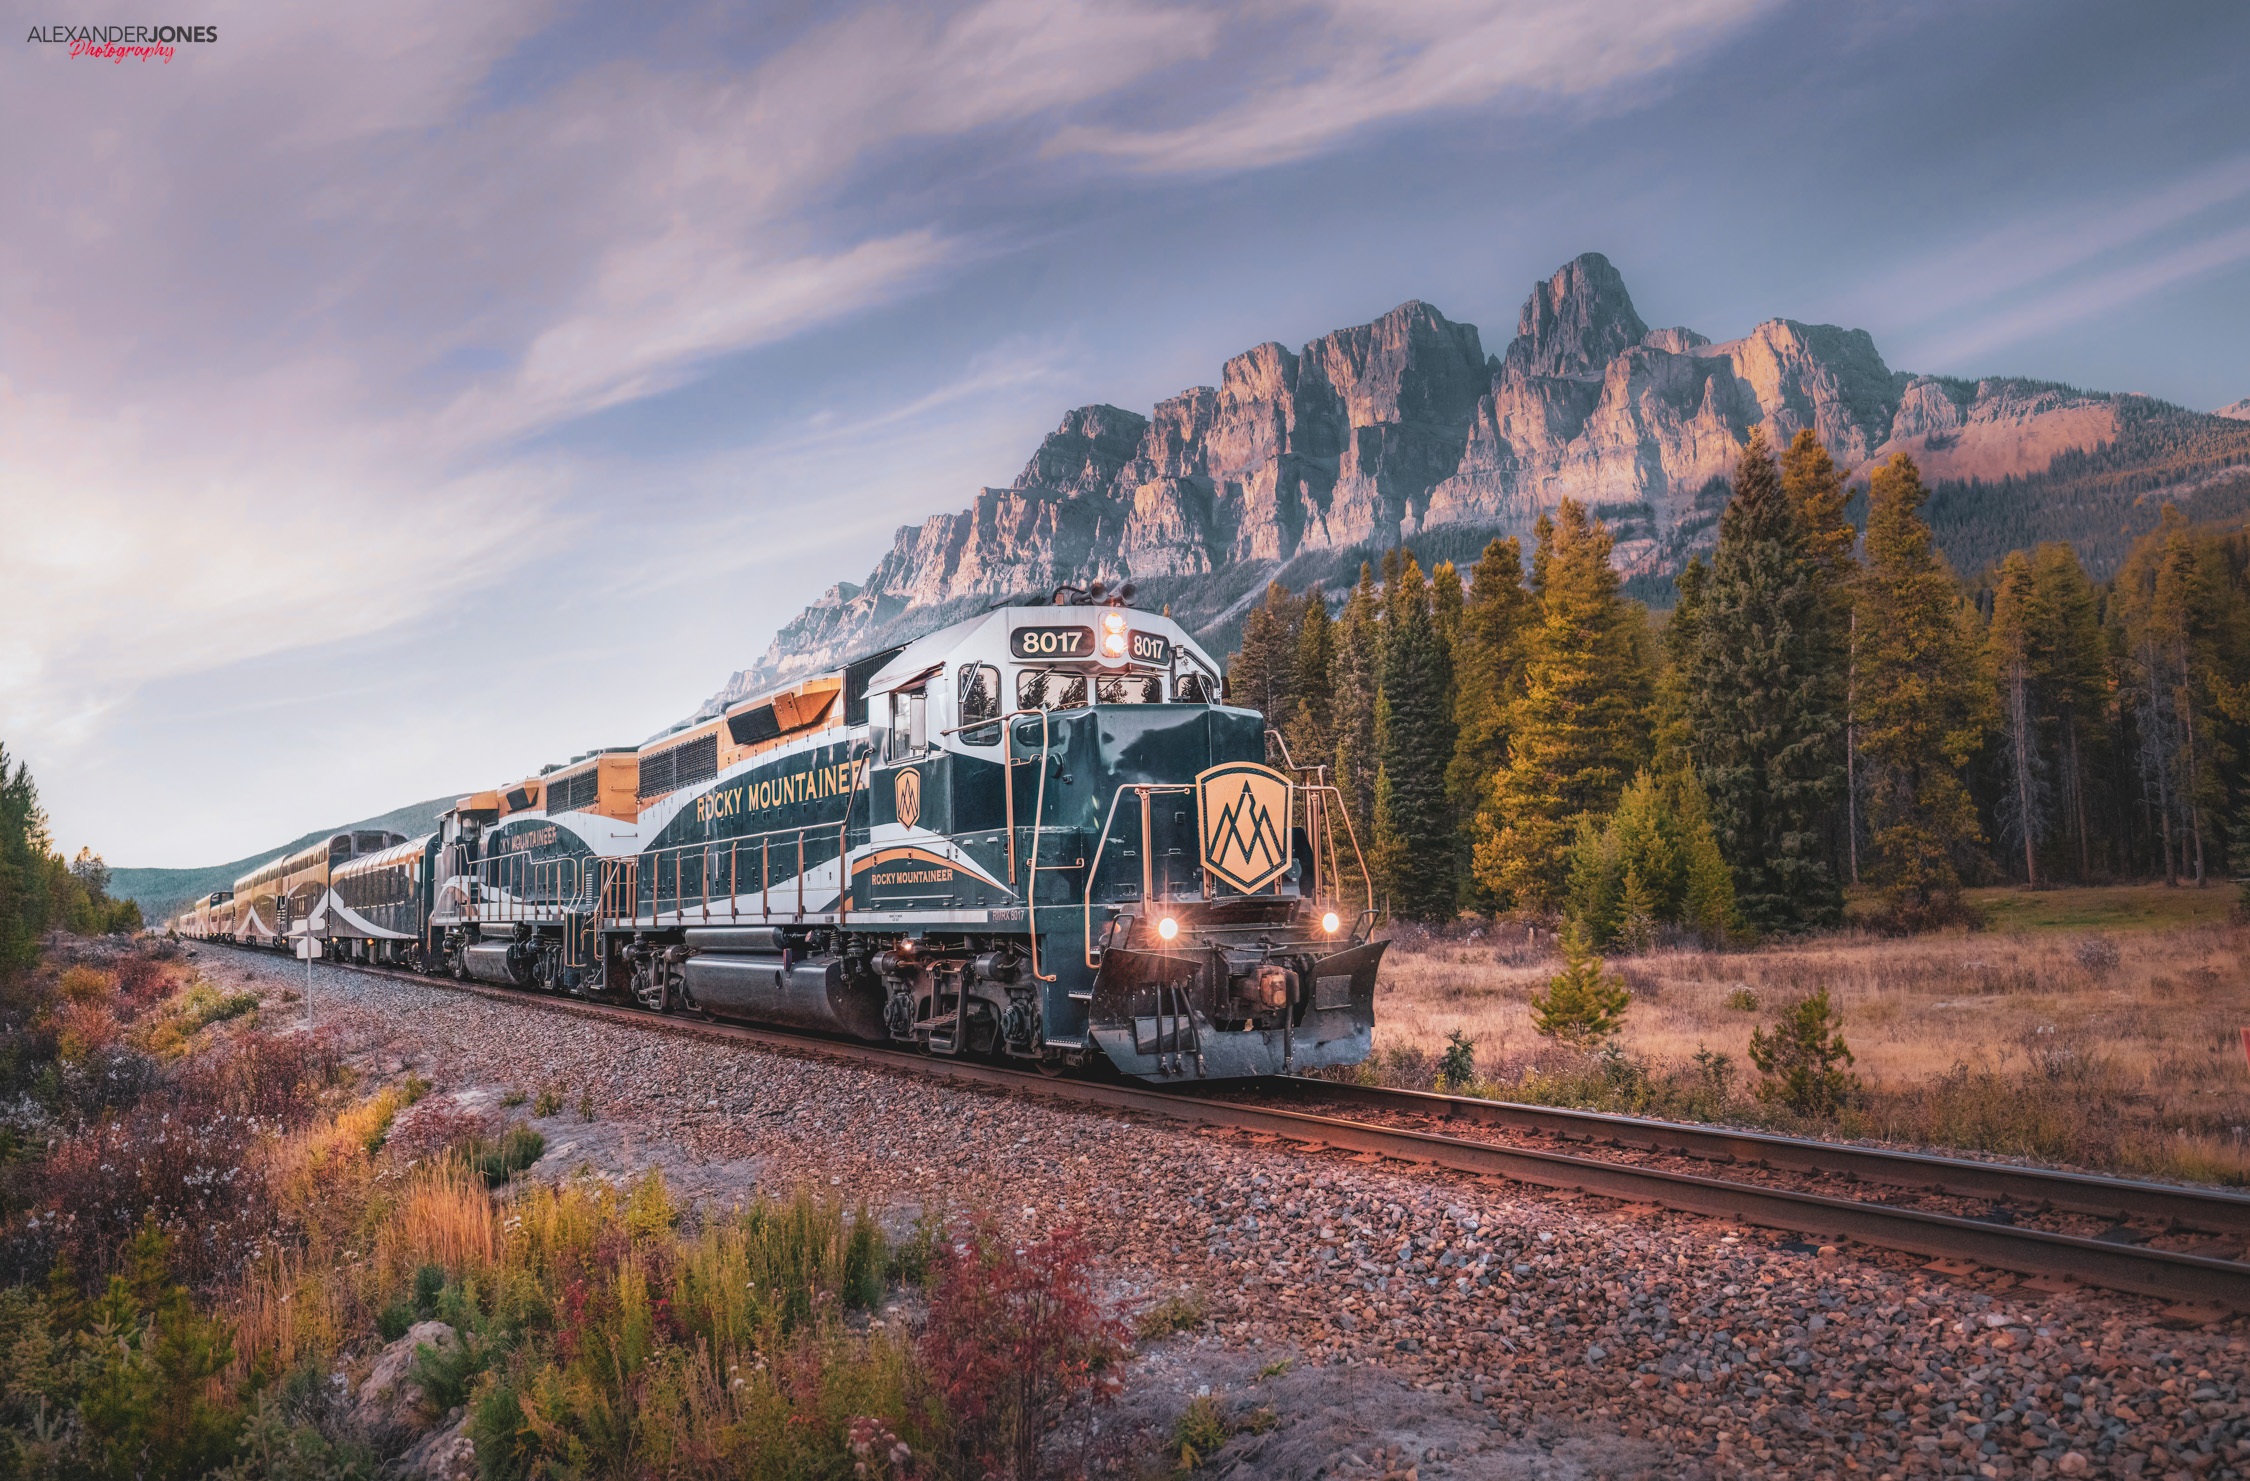 Castle Mountain is one of my favourite locations to photograph, the view of trains approaching from far away set against the...